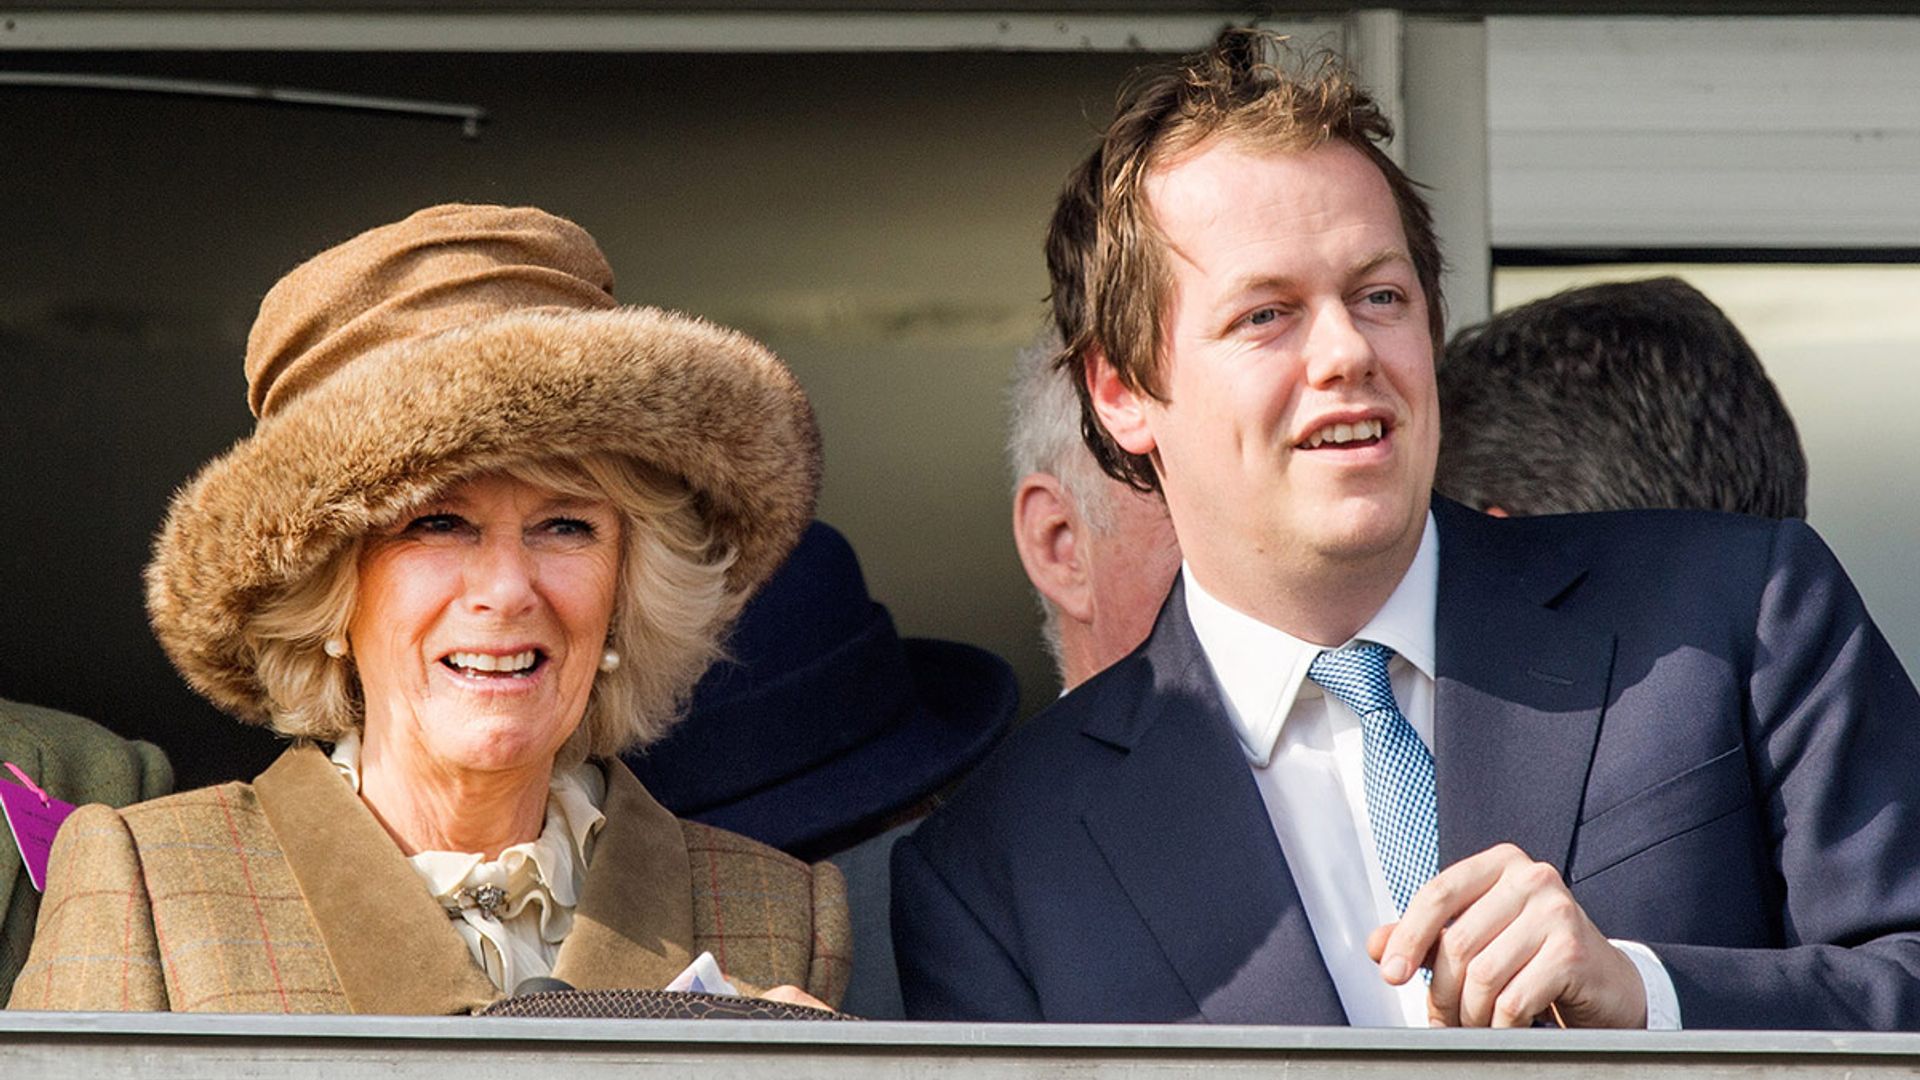 Tom Parker-Bowles on whether his mum Duchess of Cornwall will be called 'Queen'